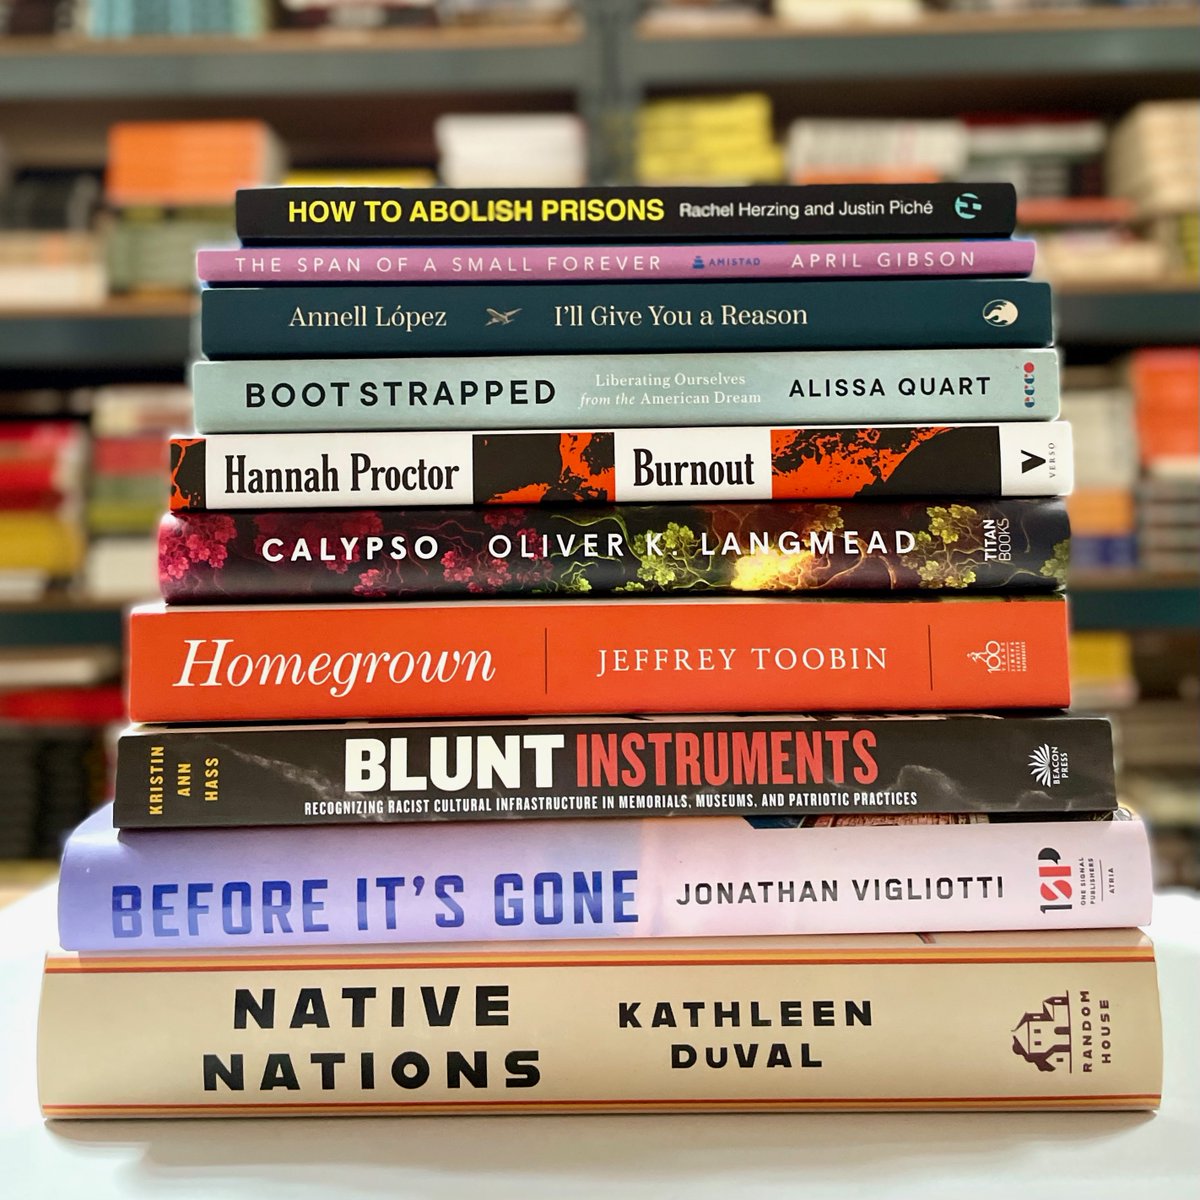 Don’t be intimidated by this stack—we just wanted to show off some of the new titles that AK Distro has gotten on our shelves this week. From fiction to prison abolition, there are some great spring reads waiting for you over at akpress.org!